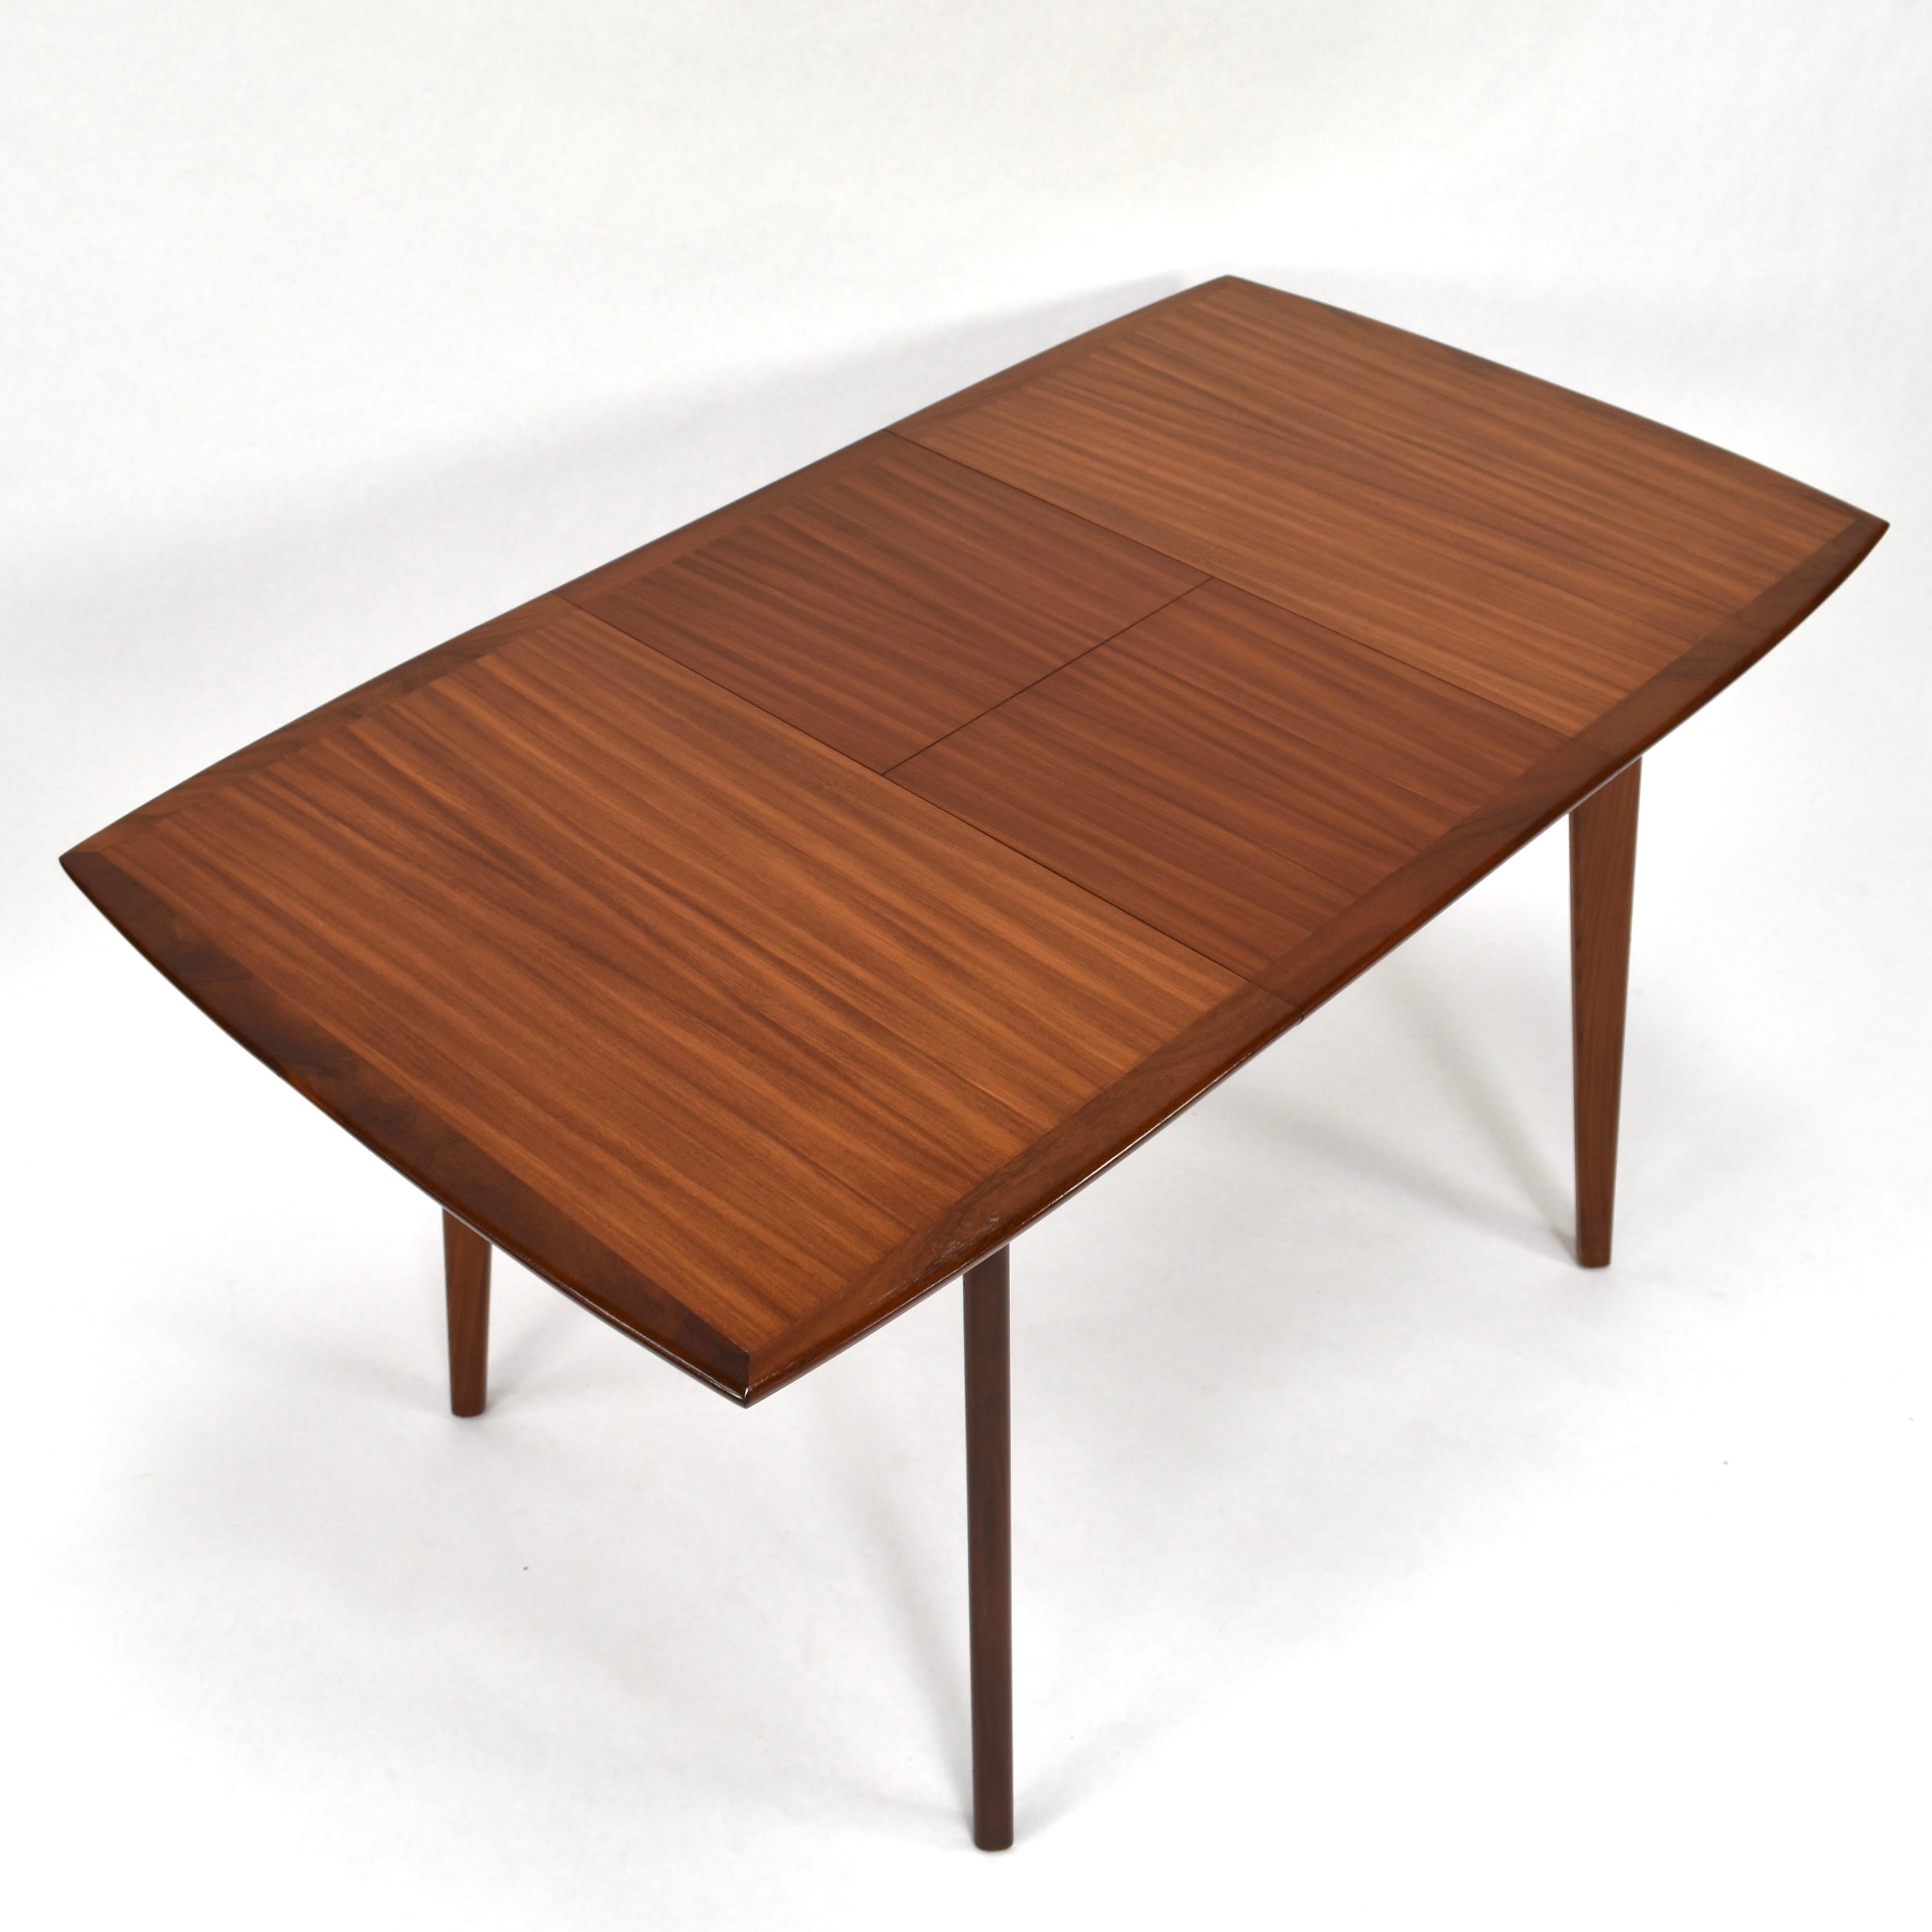 Teak fold-out dining table by Louis van Teeffelen for WeBe, Netherlands, 1960s
Teak veneer top with solid teak edges and legs.
In very good condition.
Legs can be taken of.
Minor wear on one edge (see picture)
Size in cm:
W. 100 (extracted